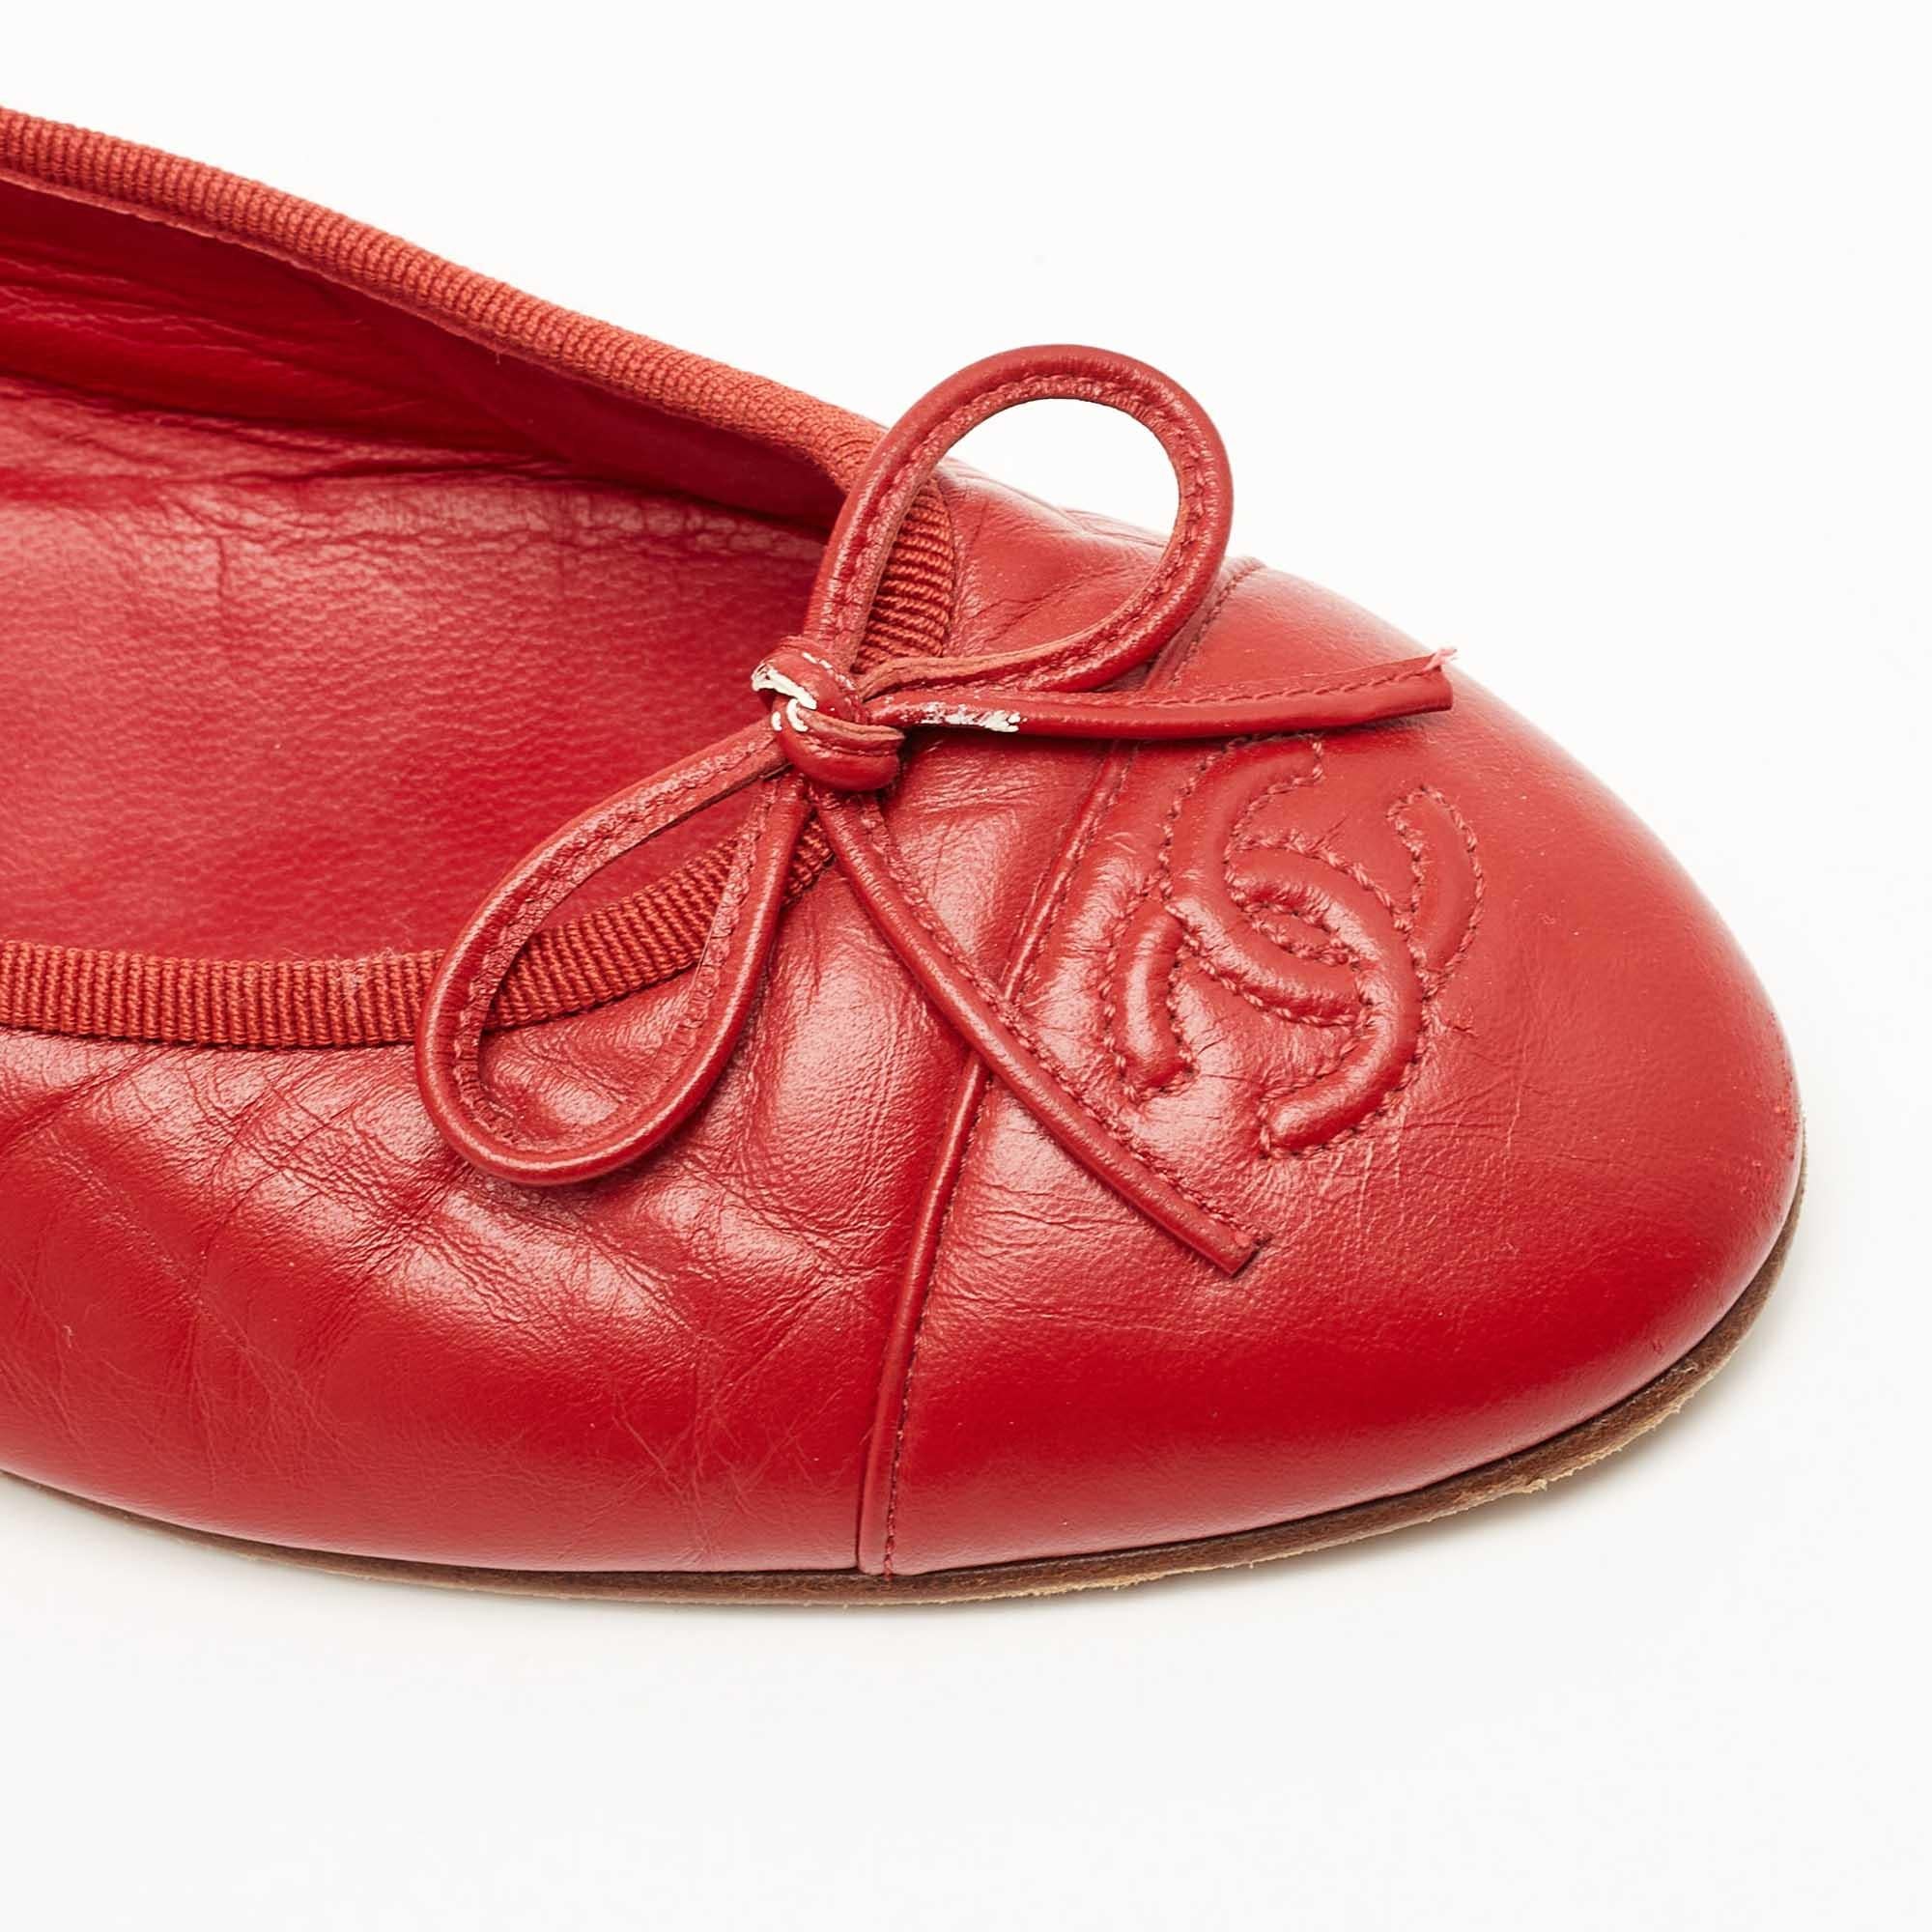 Chanel Red Leather CC Bow Ballet Flats Size 38.5 3